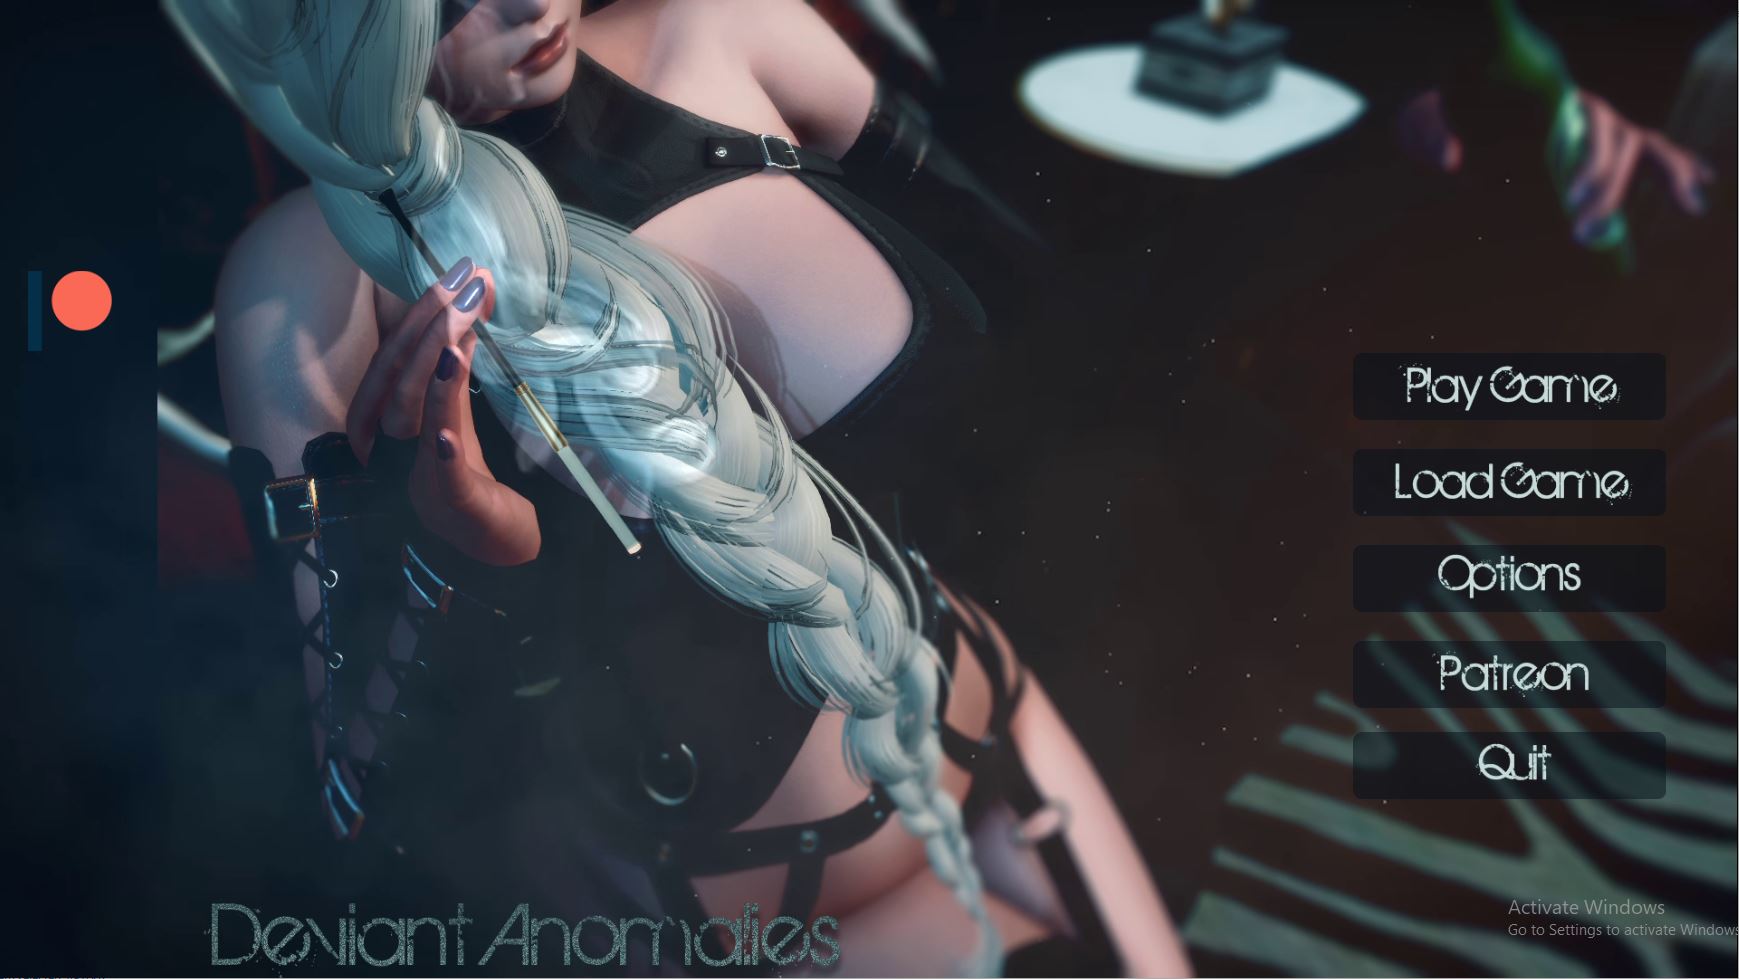 Sexy Bp Hd Full Download Game - Download Free Hentai Game Porn Games Deviant Anomalies (v0.8.4)